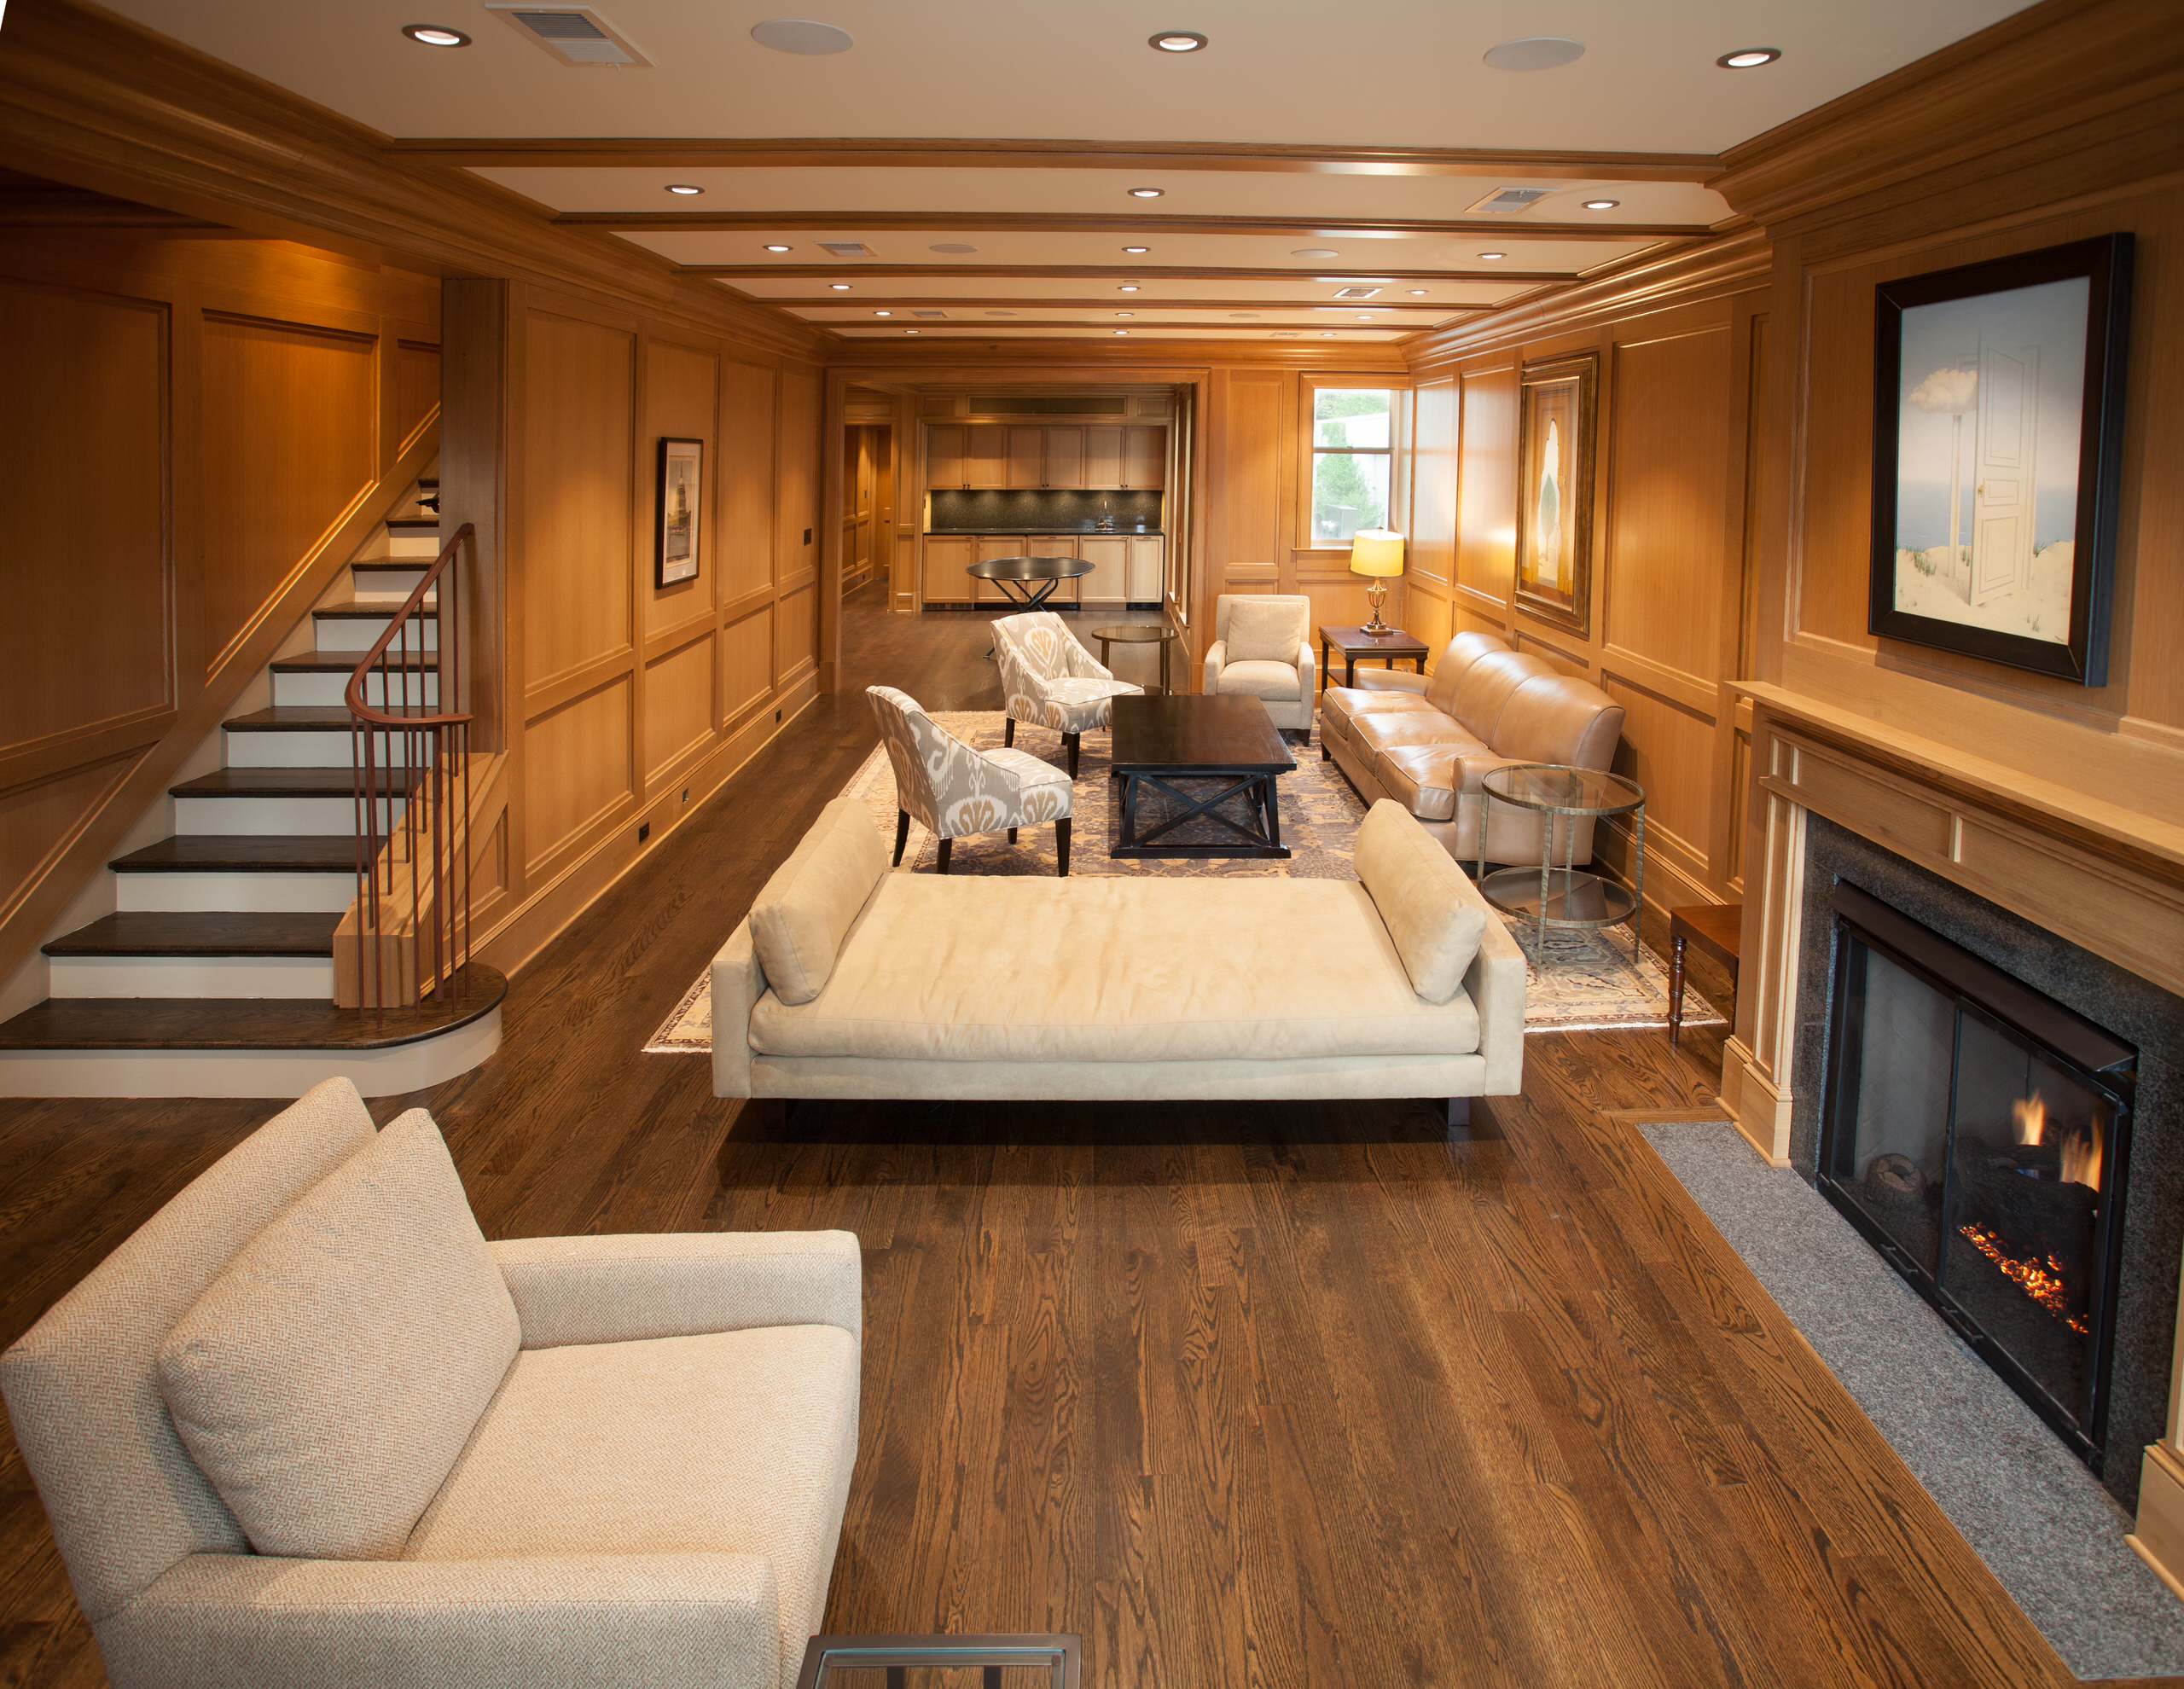 1-85 How to Decorate a Living Room with Wood Paneling